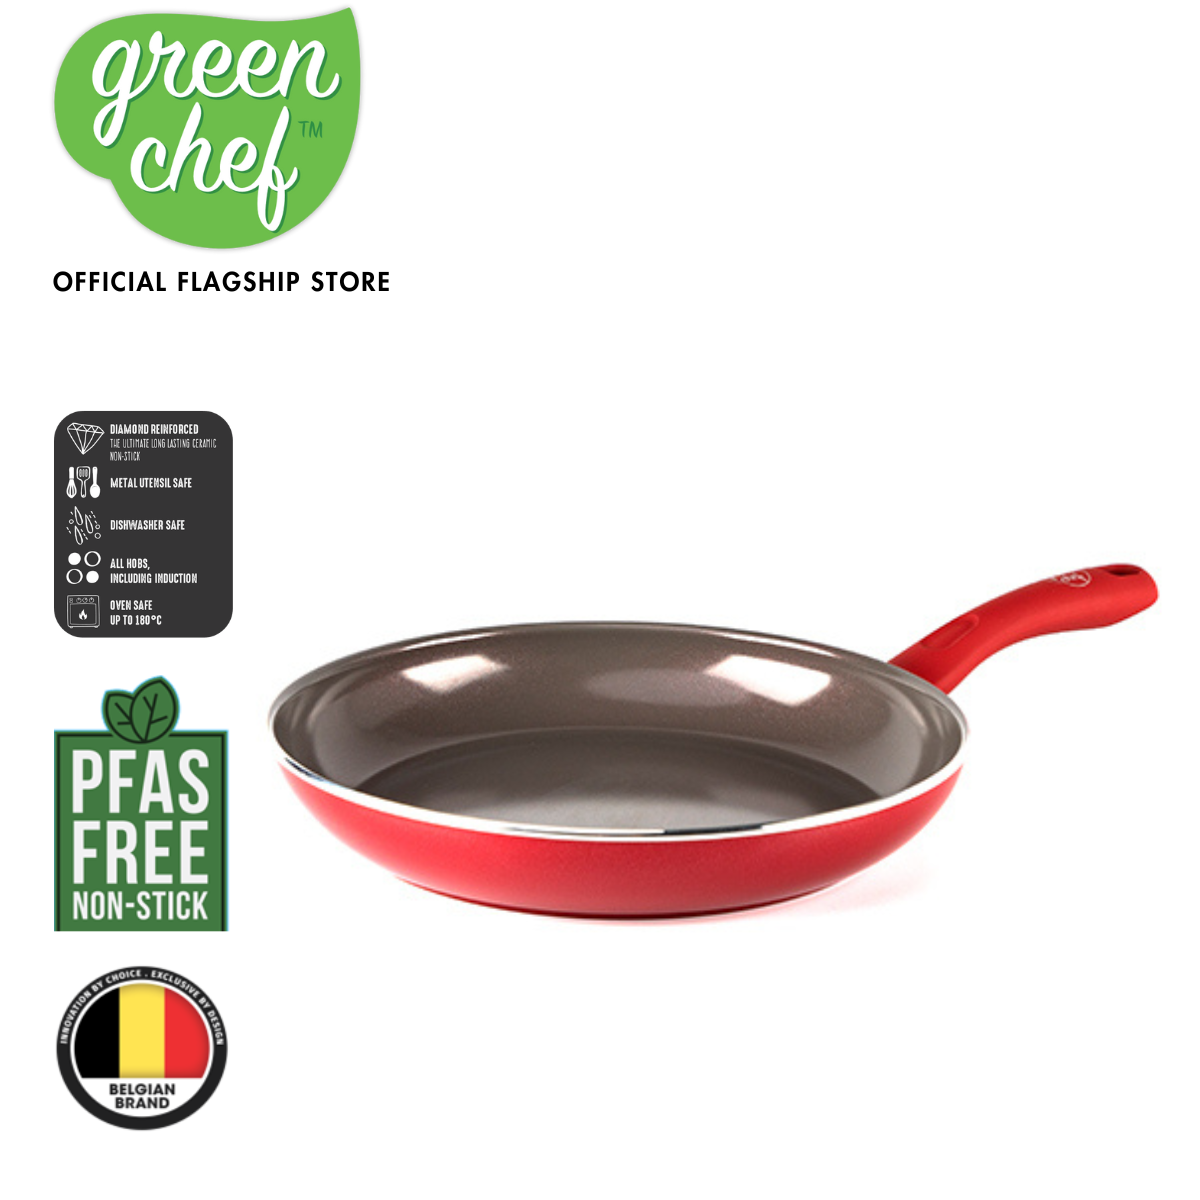 GreenPan Greenchef Diamond Red Sauce Pan 18cm - Cookware, Pots and Pans, Cooking Utensils, Kitchen Appliances